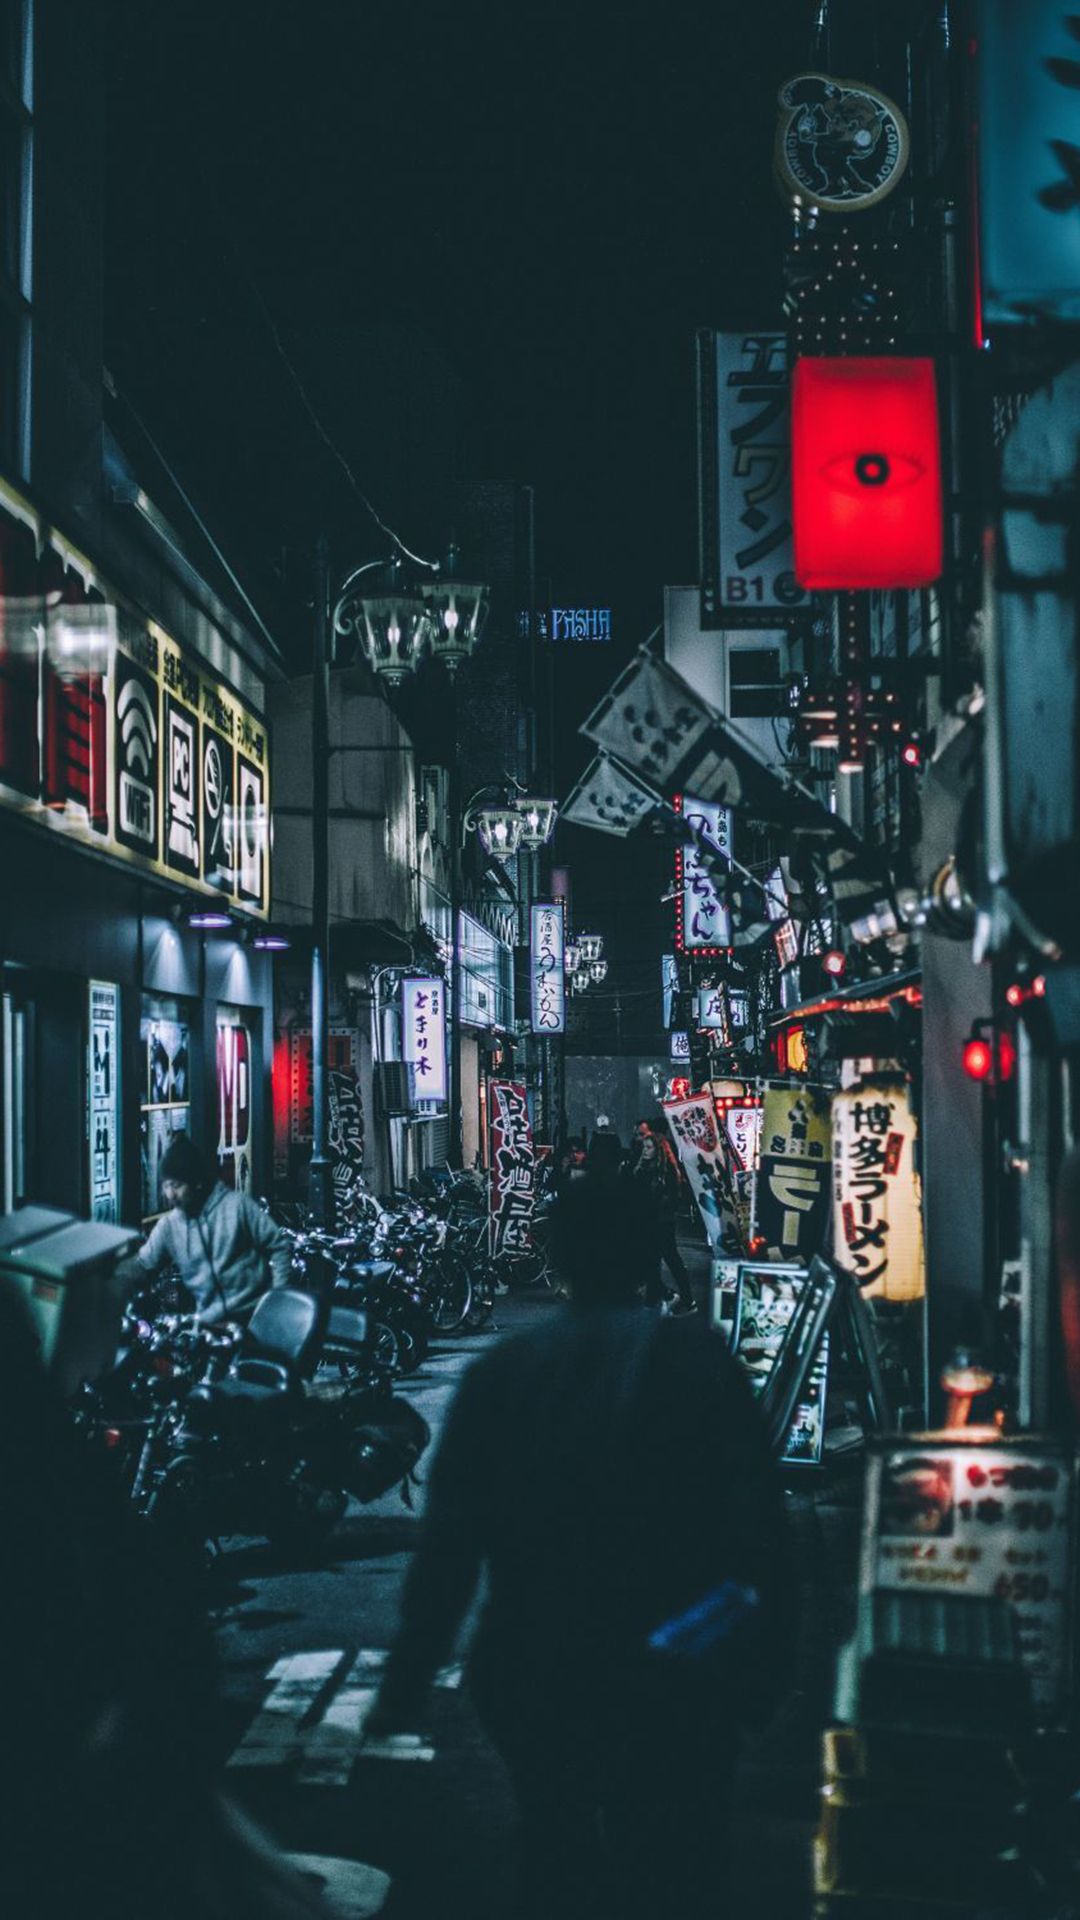 IPhone wallpaper of a street in Tokyo at night with neon signs - HD